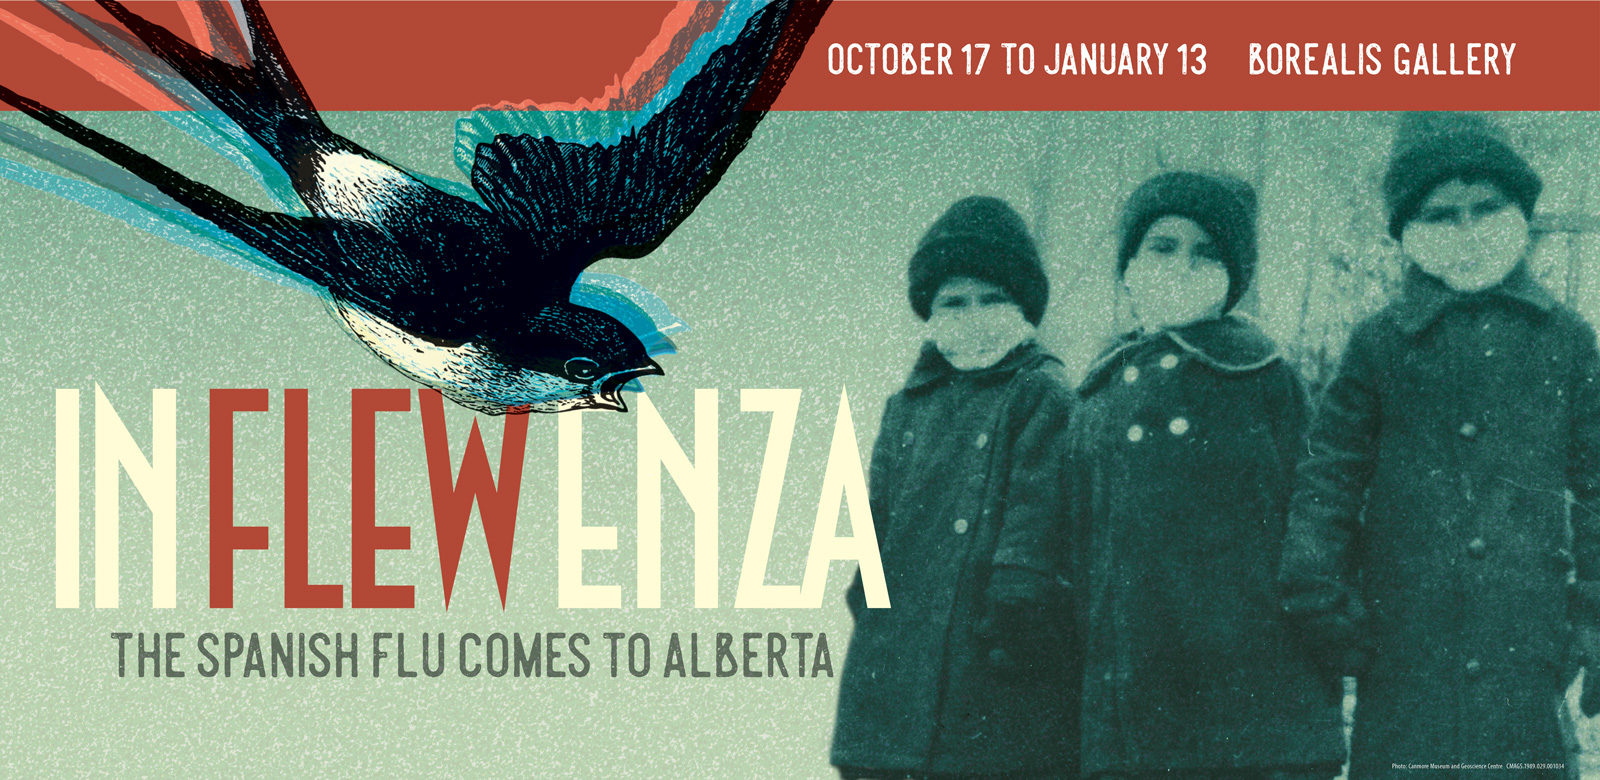 October 17, 2018 to January 13, 2019 - IN FLEW ENZA: The Spanish Flu Comes to Alberta